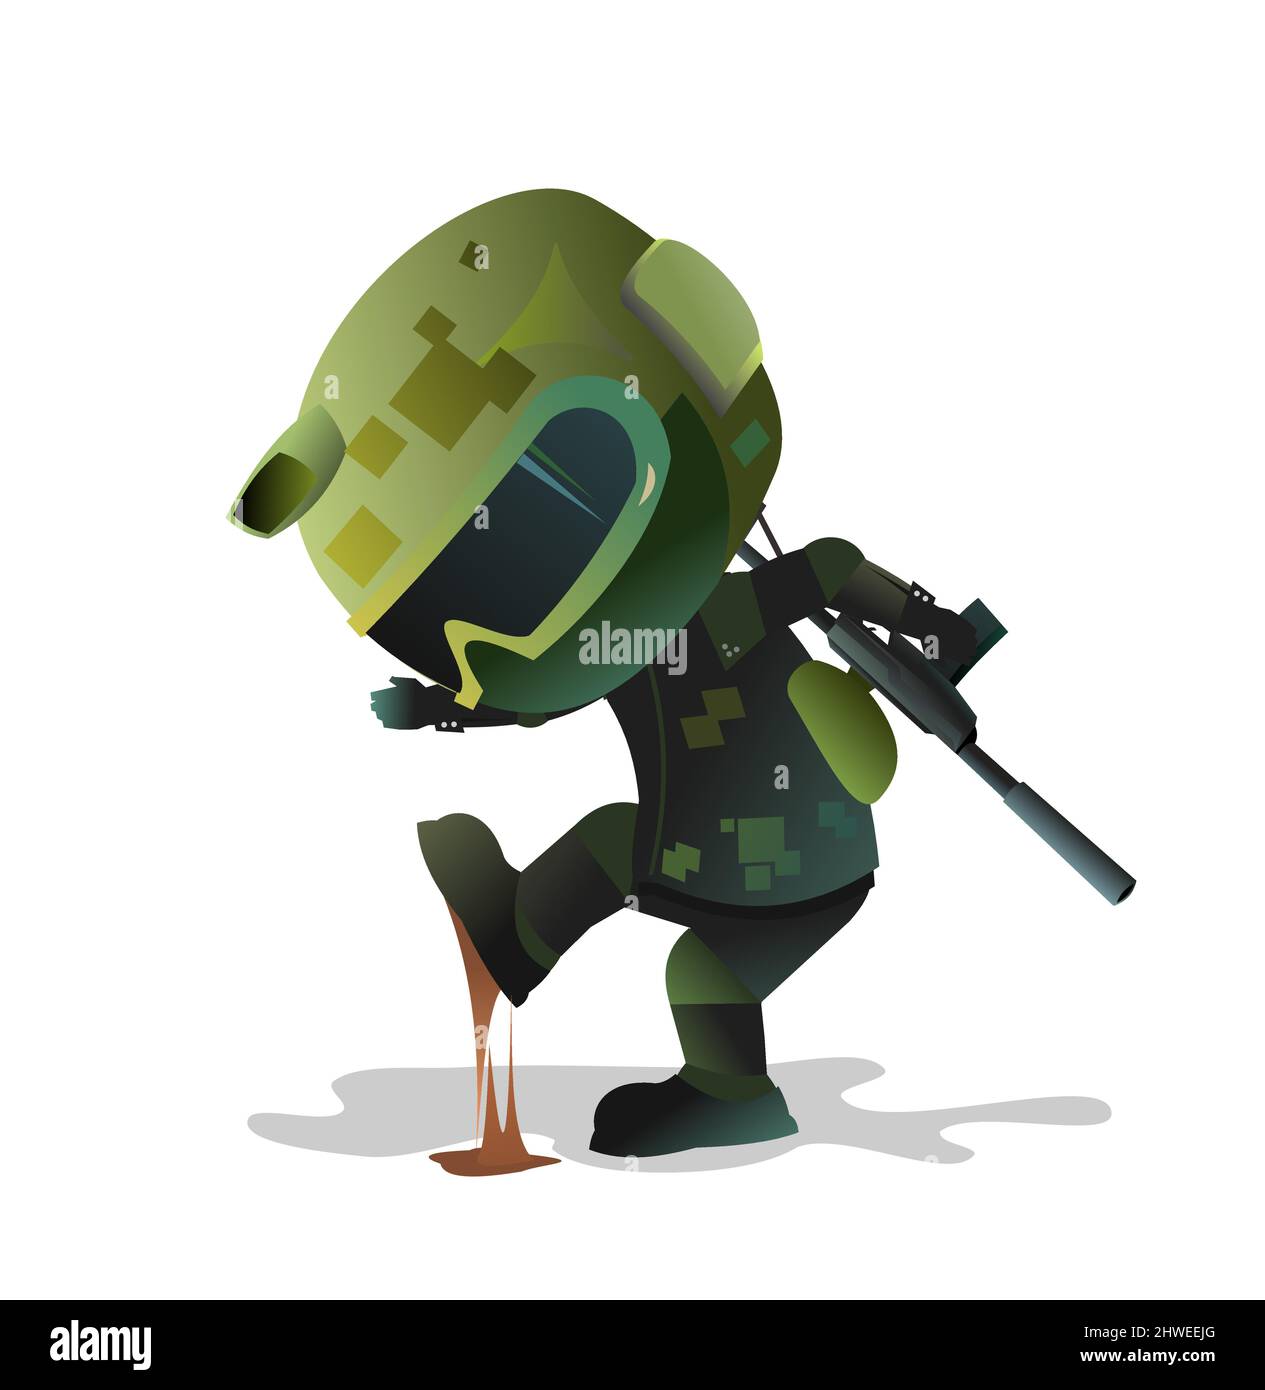 Warrior paintball player stepped on dirt. Comic funny character. Helmet, mask and uniform. Isolated on white background. Vector Stock Vector